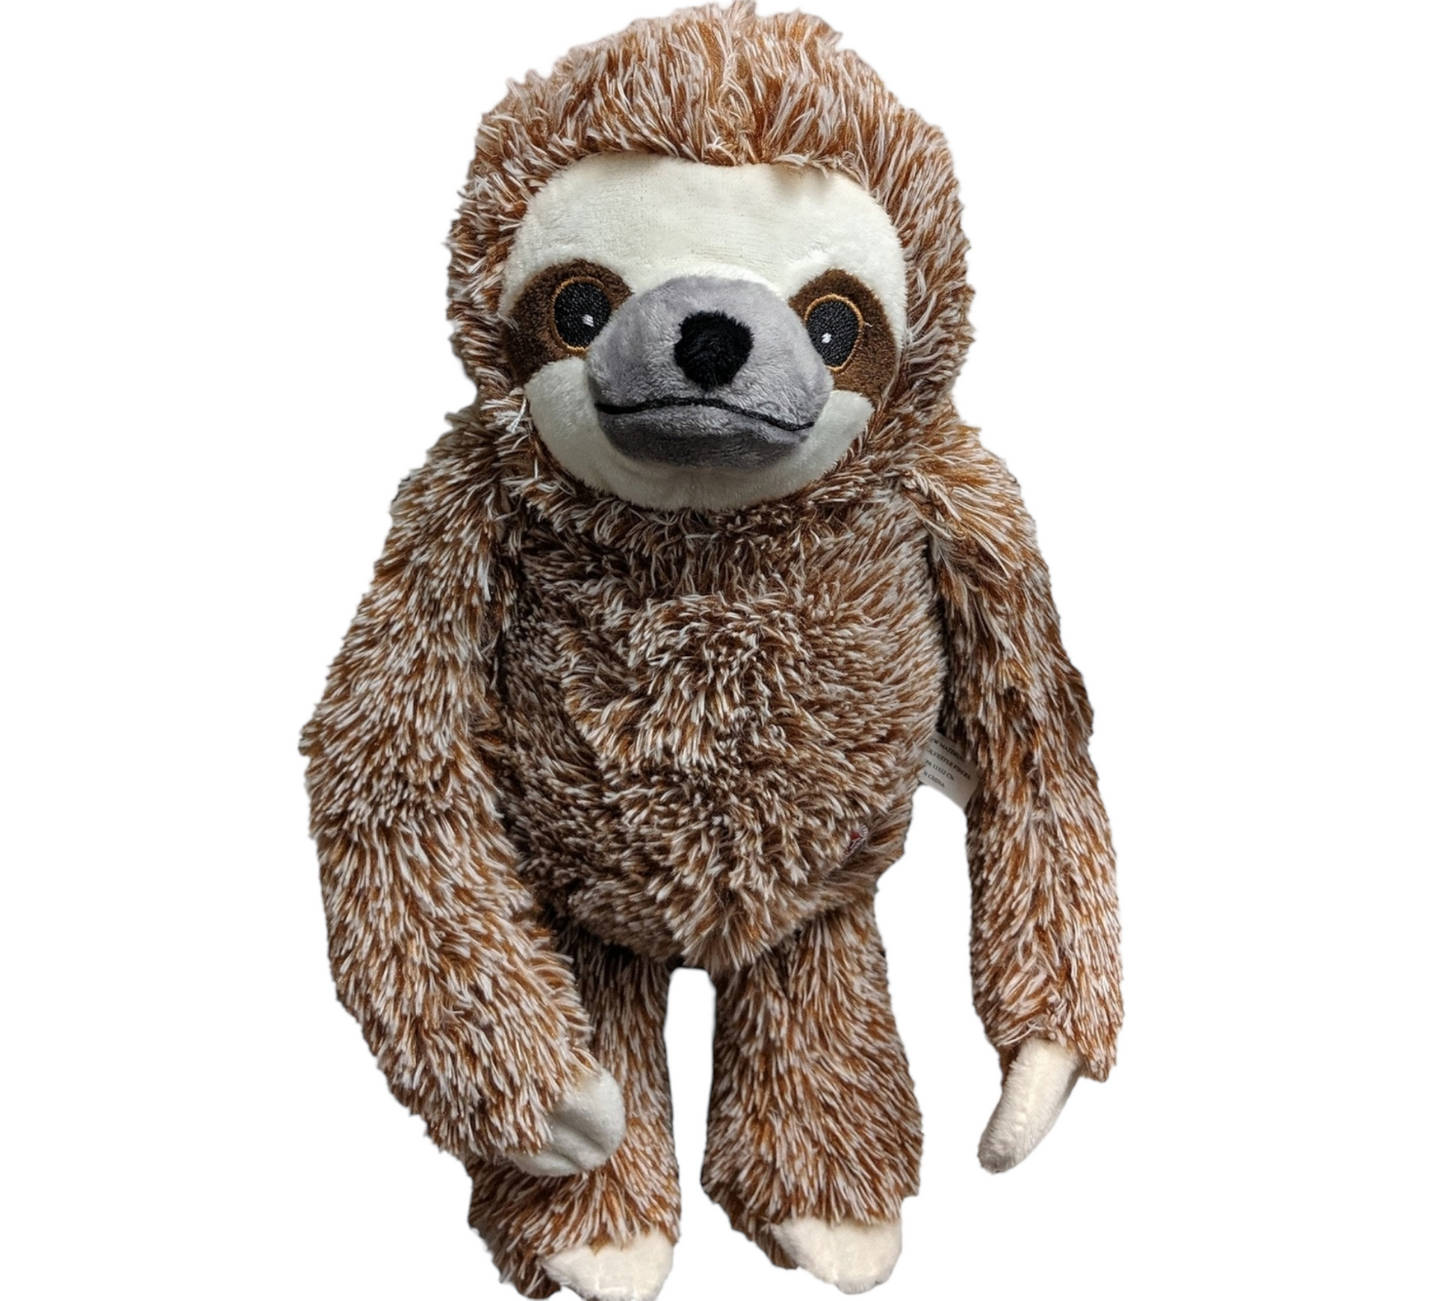 Ethical Pet Fun Sloth Squeaky Plush Dog Toy, Color Varies